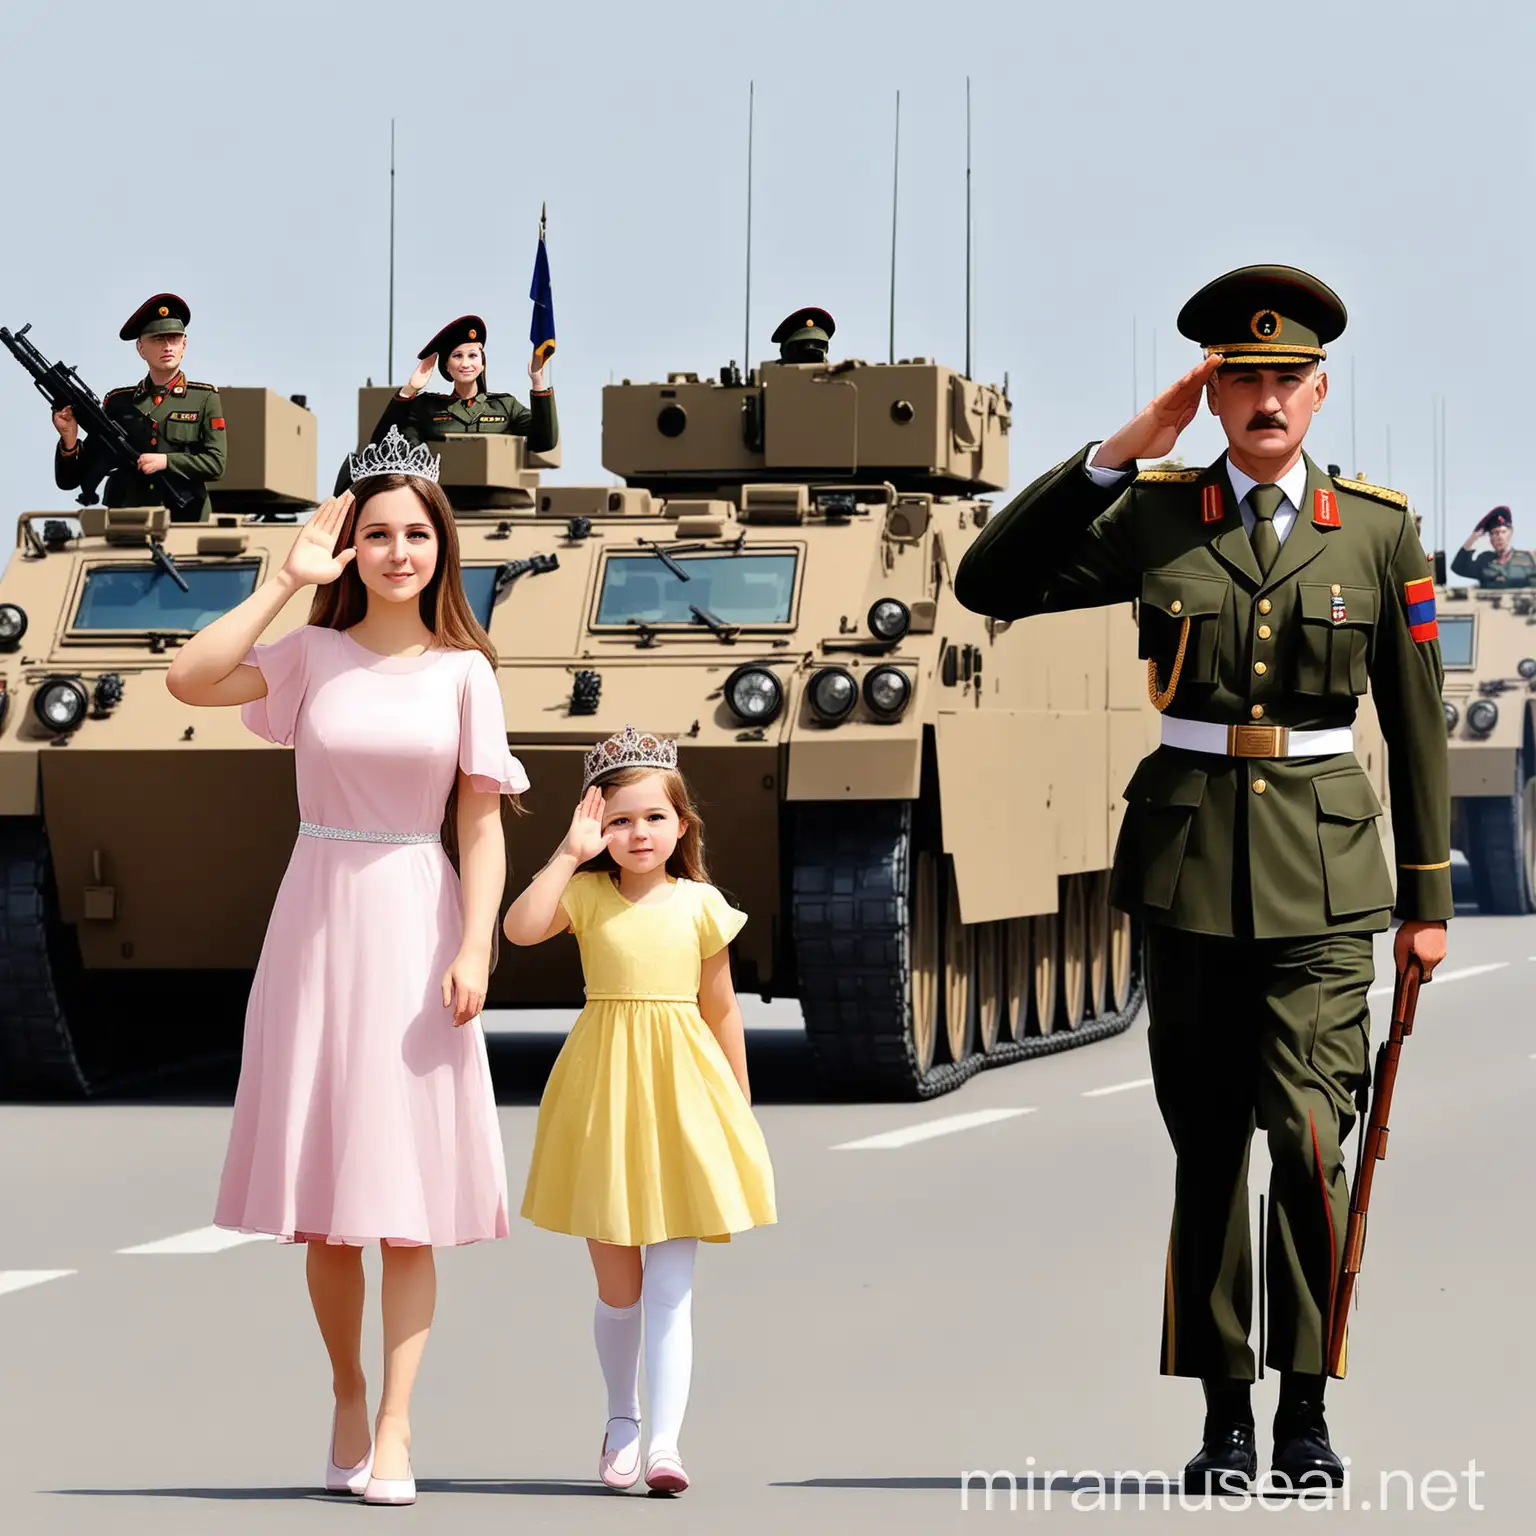 A 30-year-old princess and her daughter are walking this way.
The soldiers in front of the military vehicles salute them.